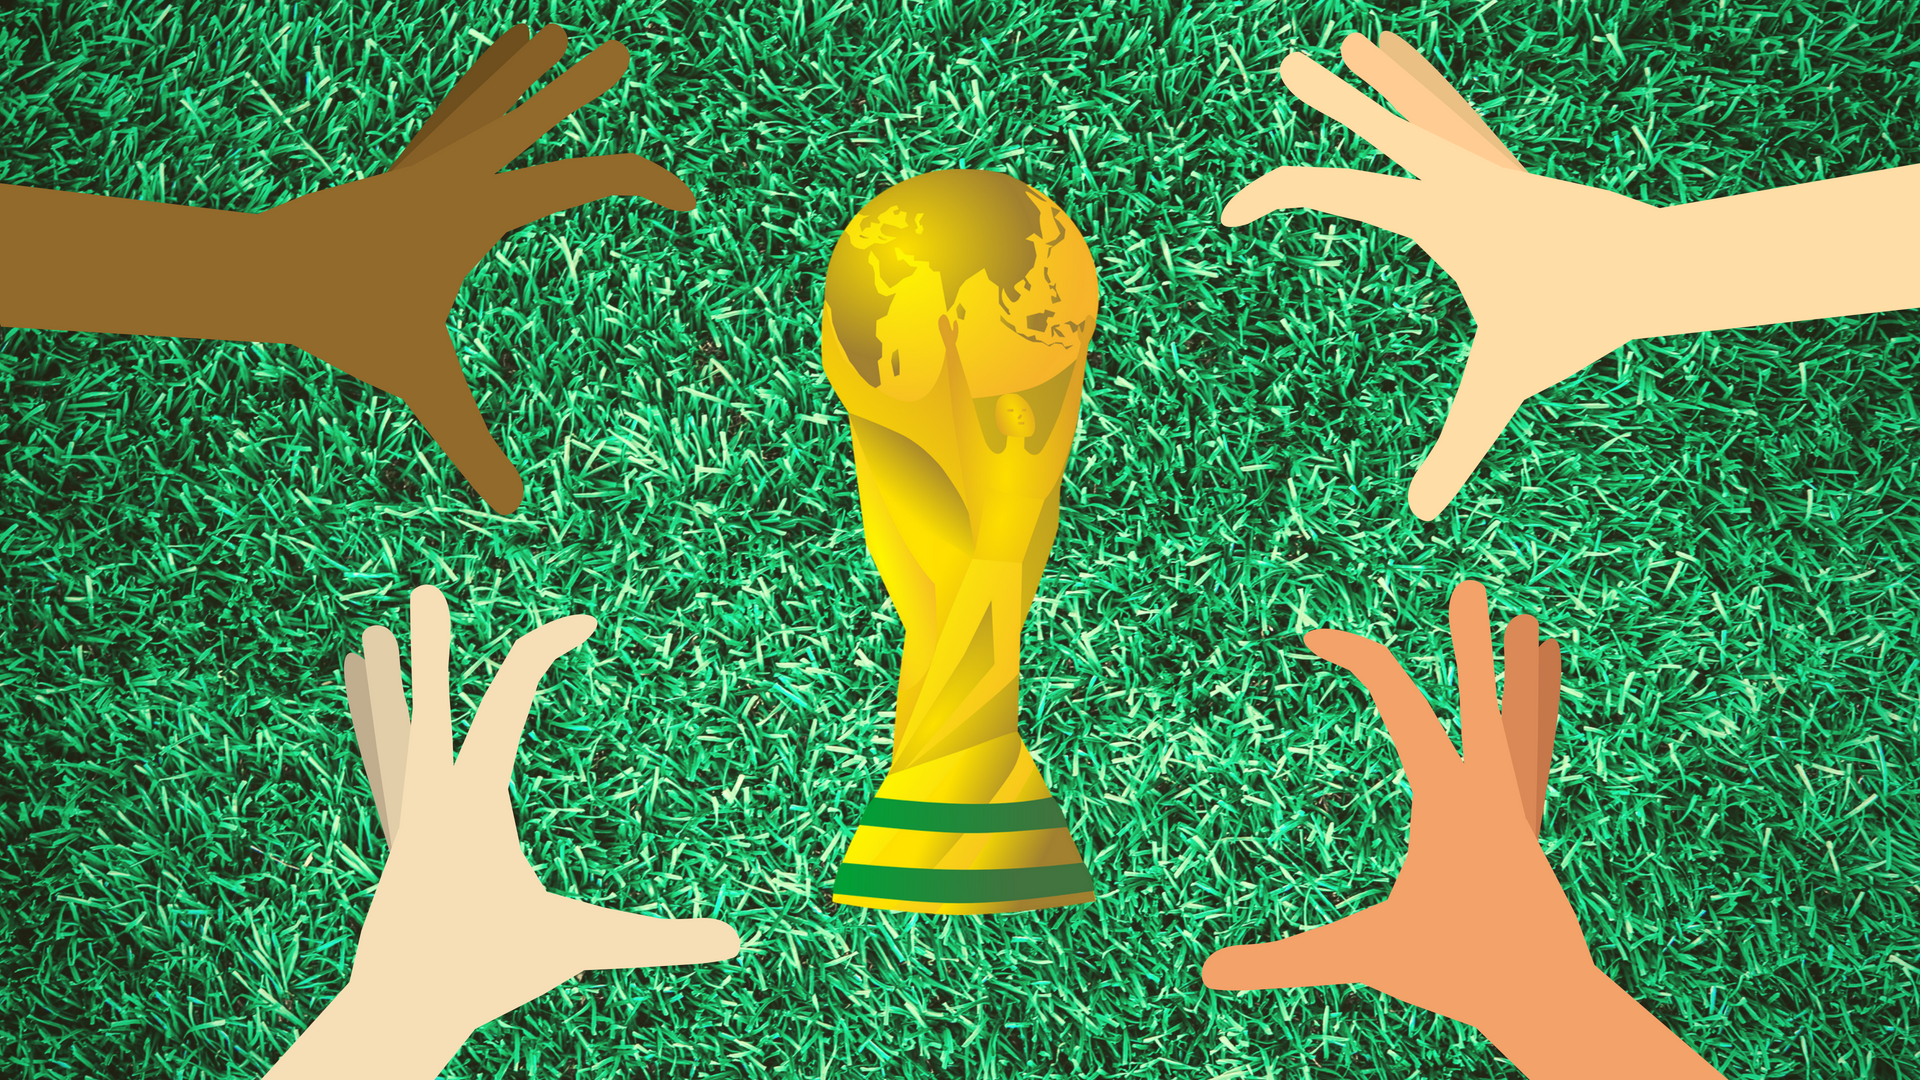 Four different hands reach for the FIFA World Cup trophy.